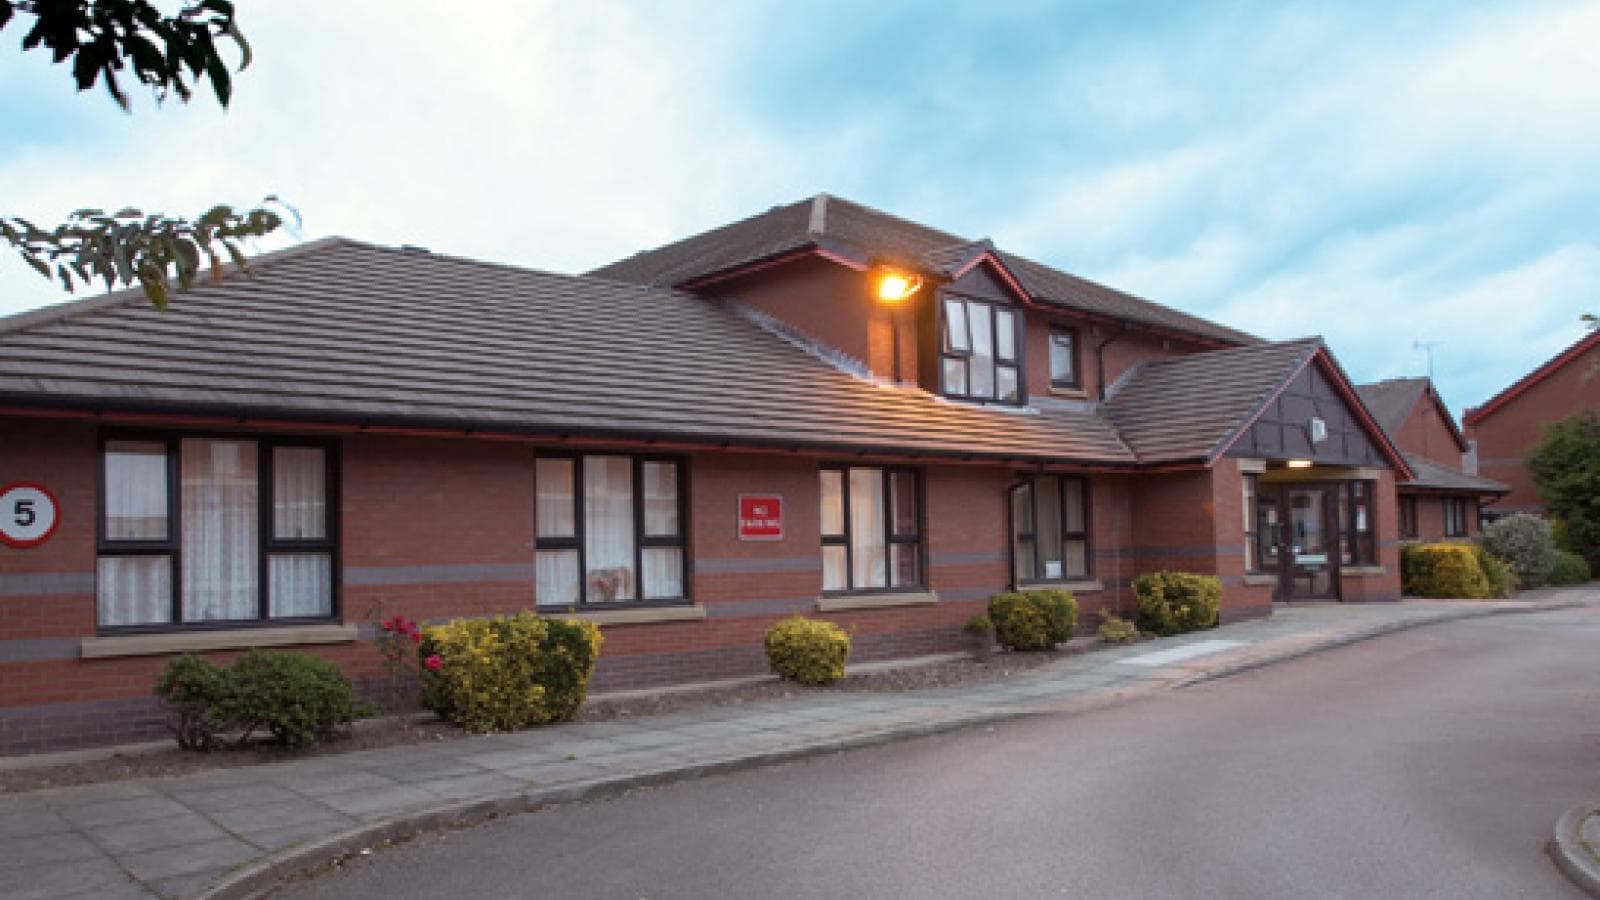 Pennystone Court care home